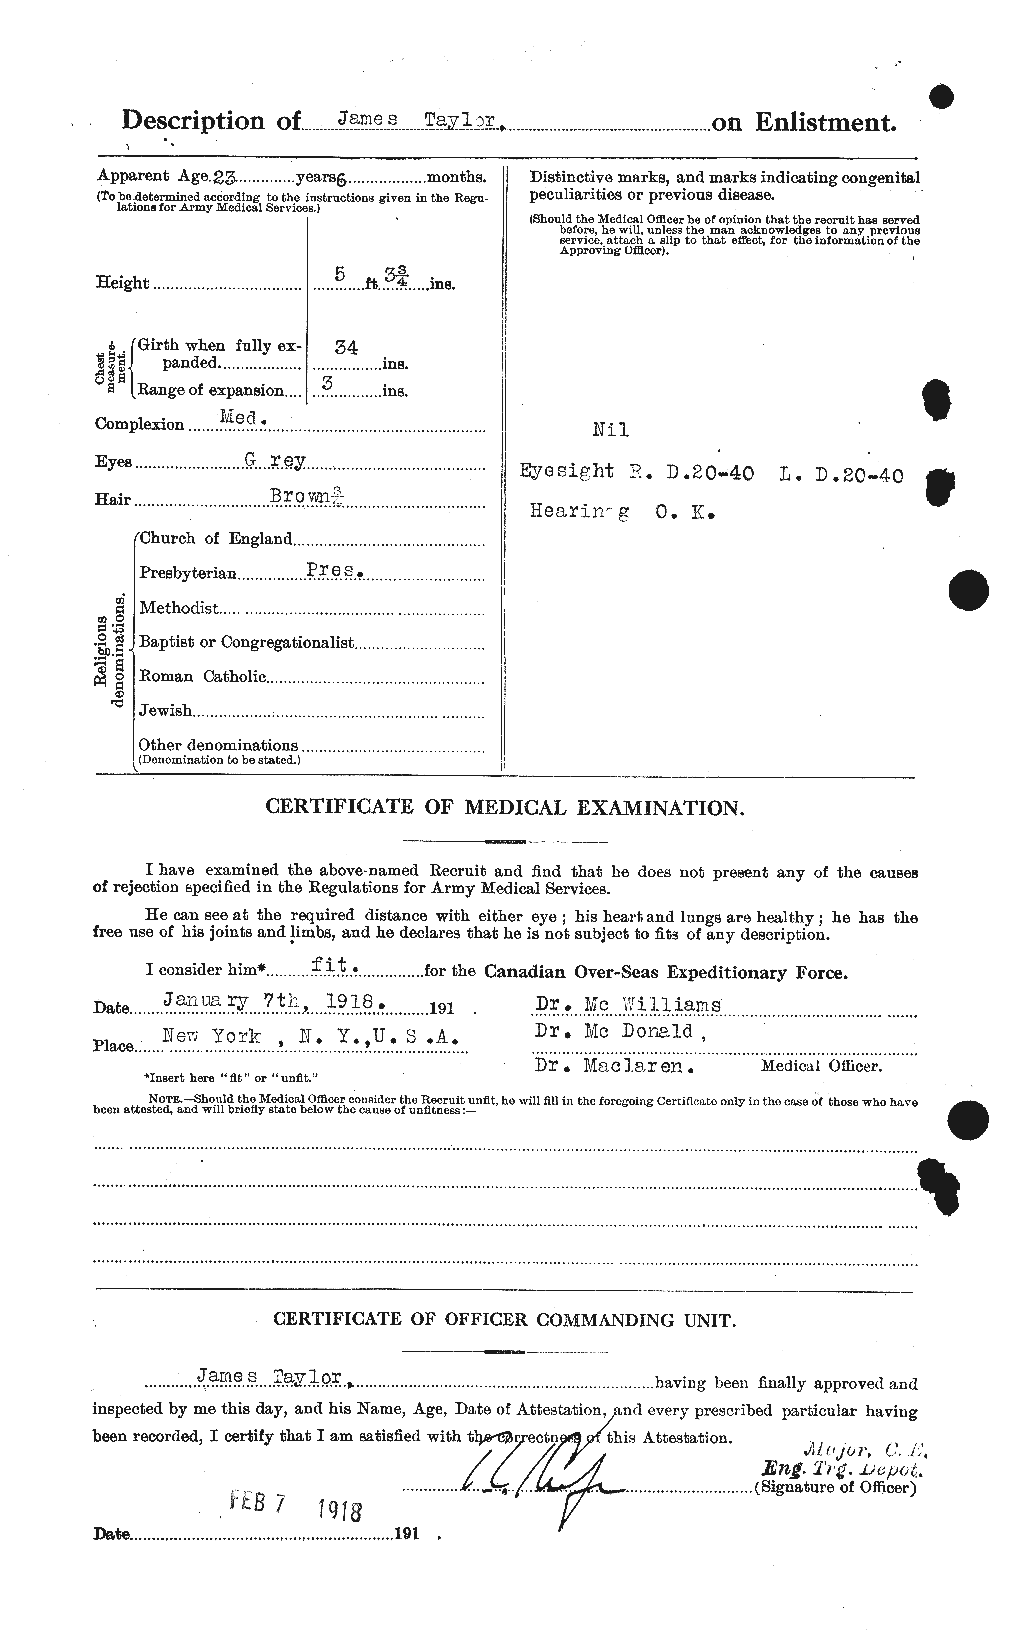 Personnel Records of the First World War - CEF 626666b